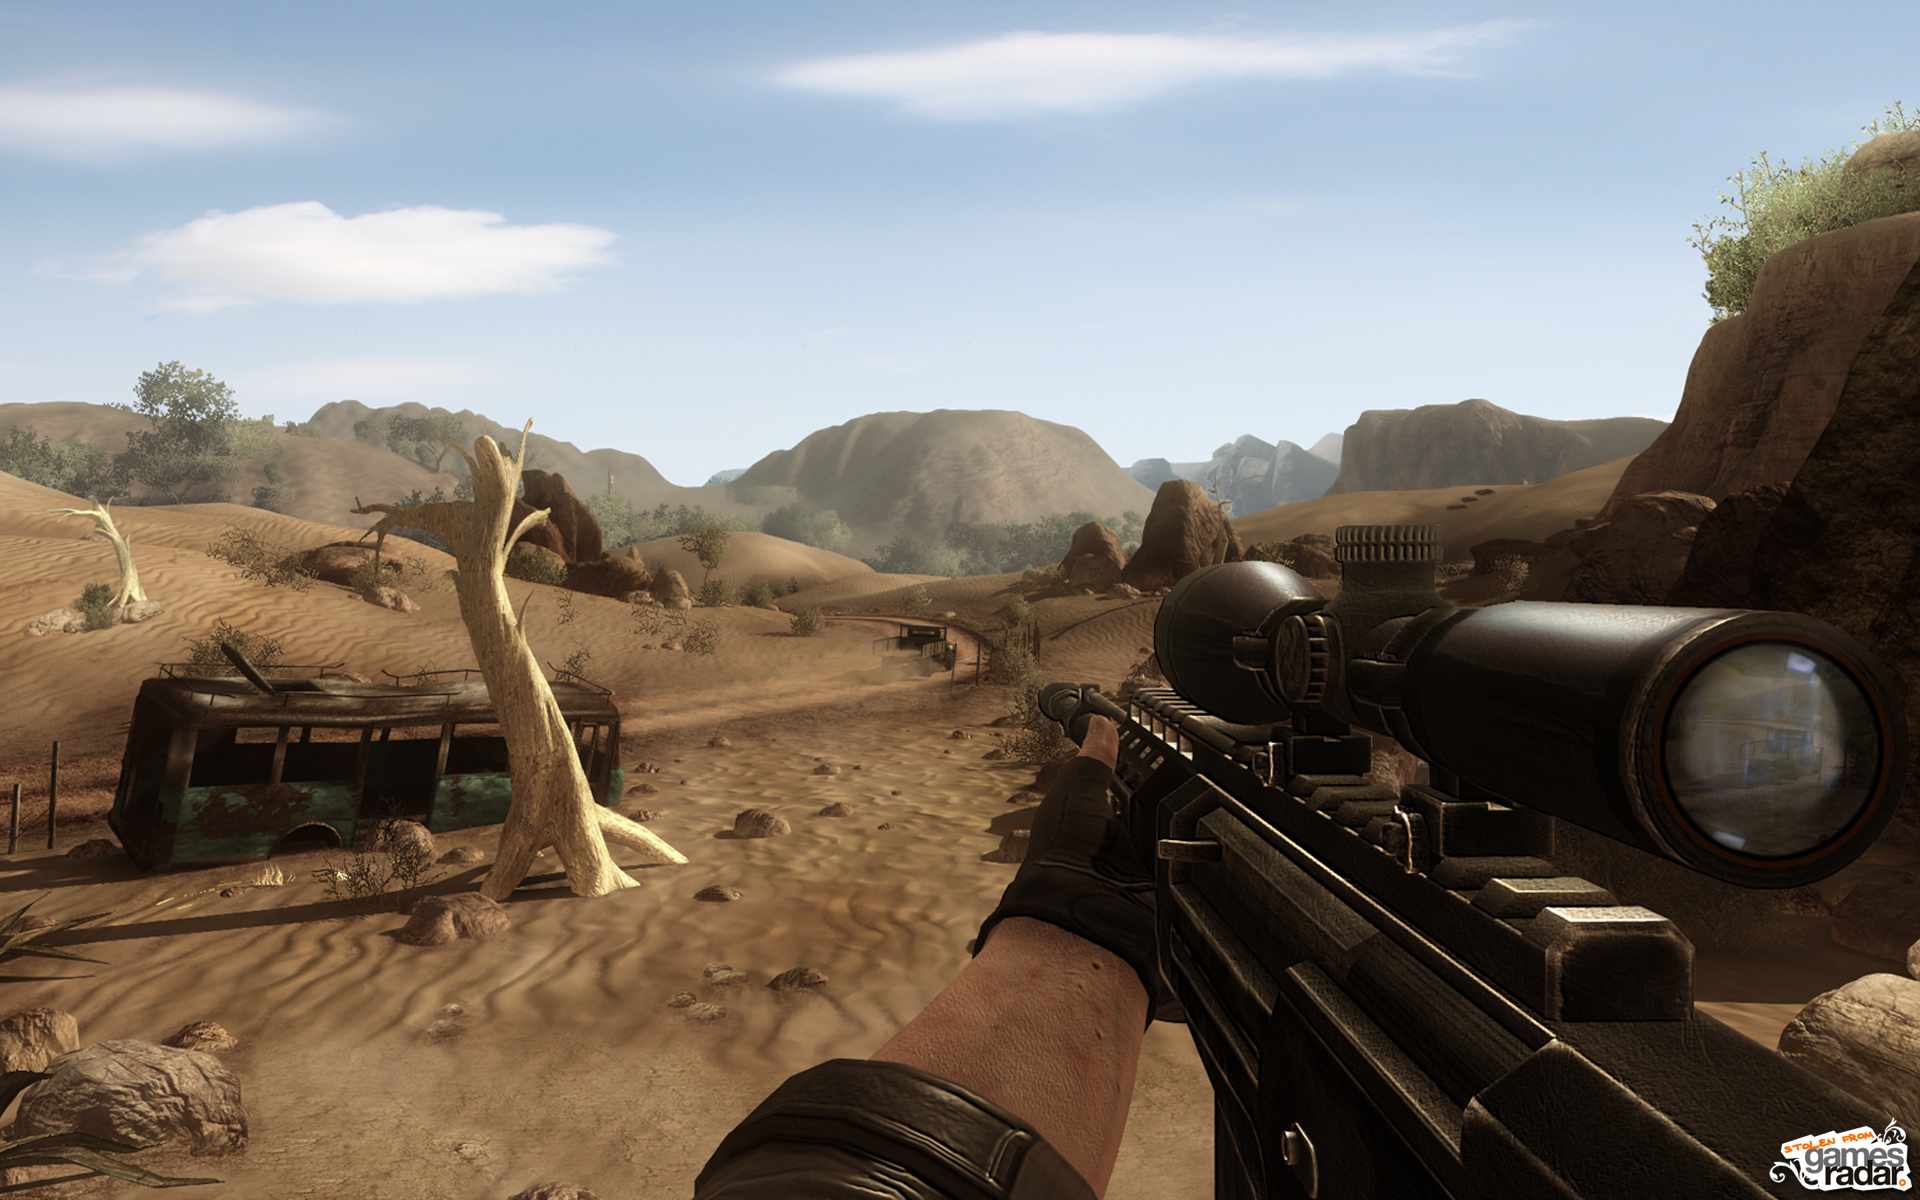 Far Cry 2 is beautiful but dumb – A MOST AGREEABLE PASTIME